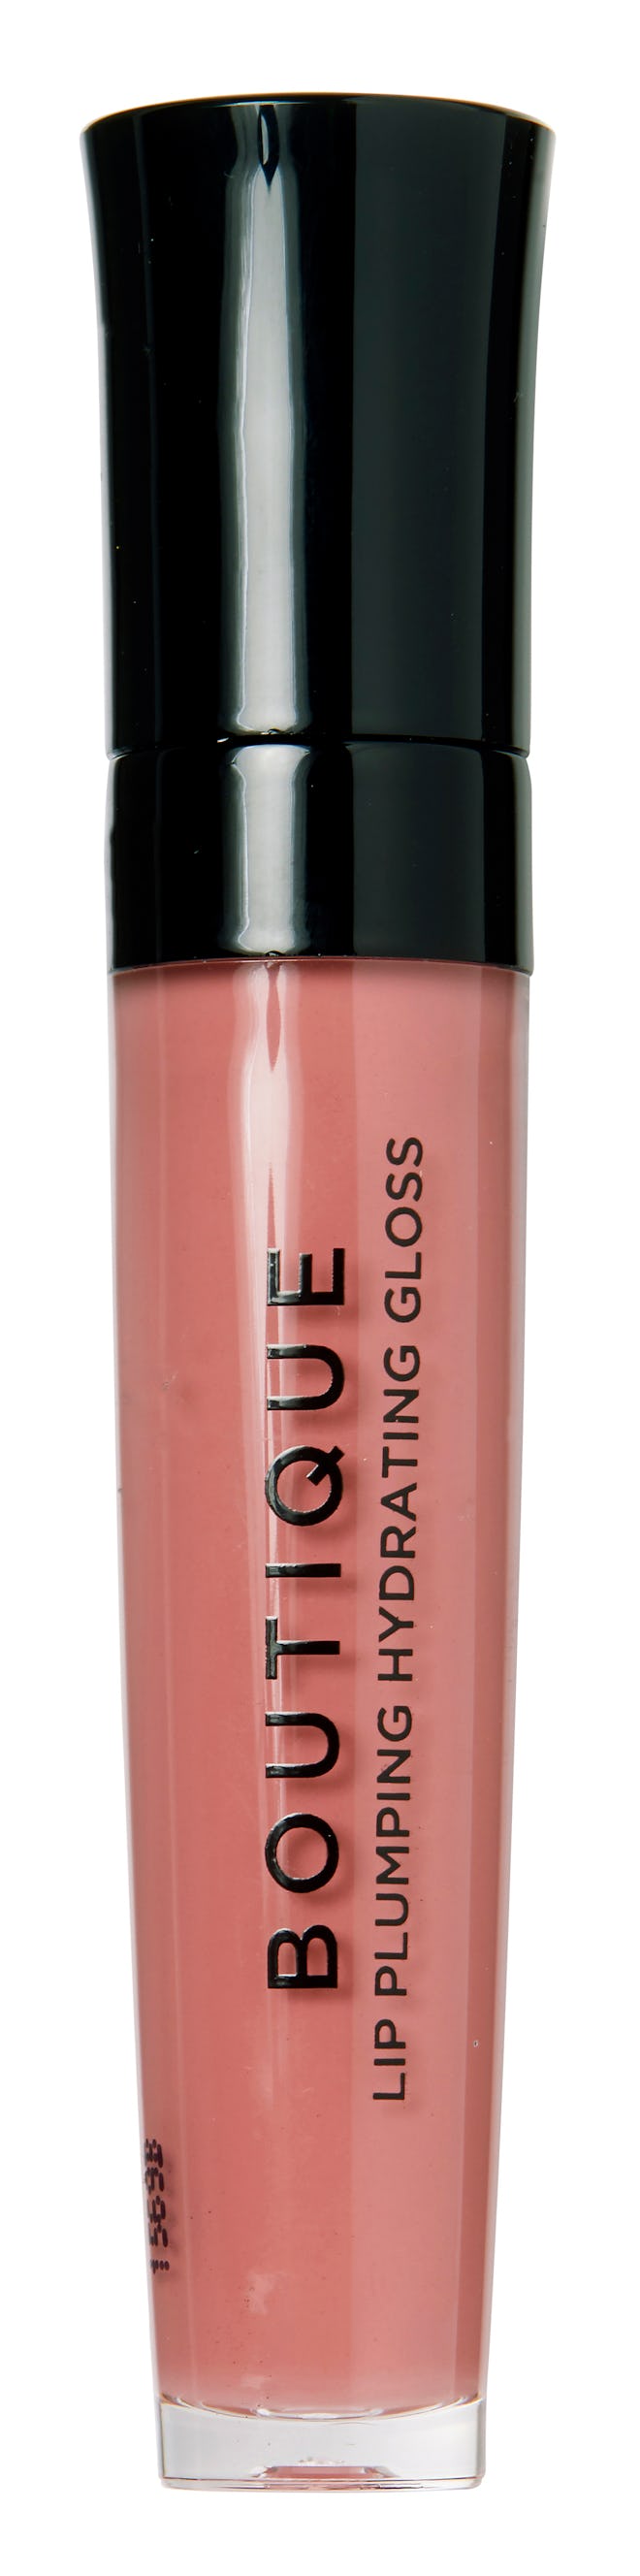 Boutique Lip Gloss in Kiss Me Softly